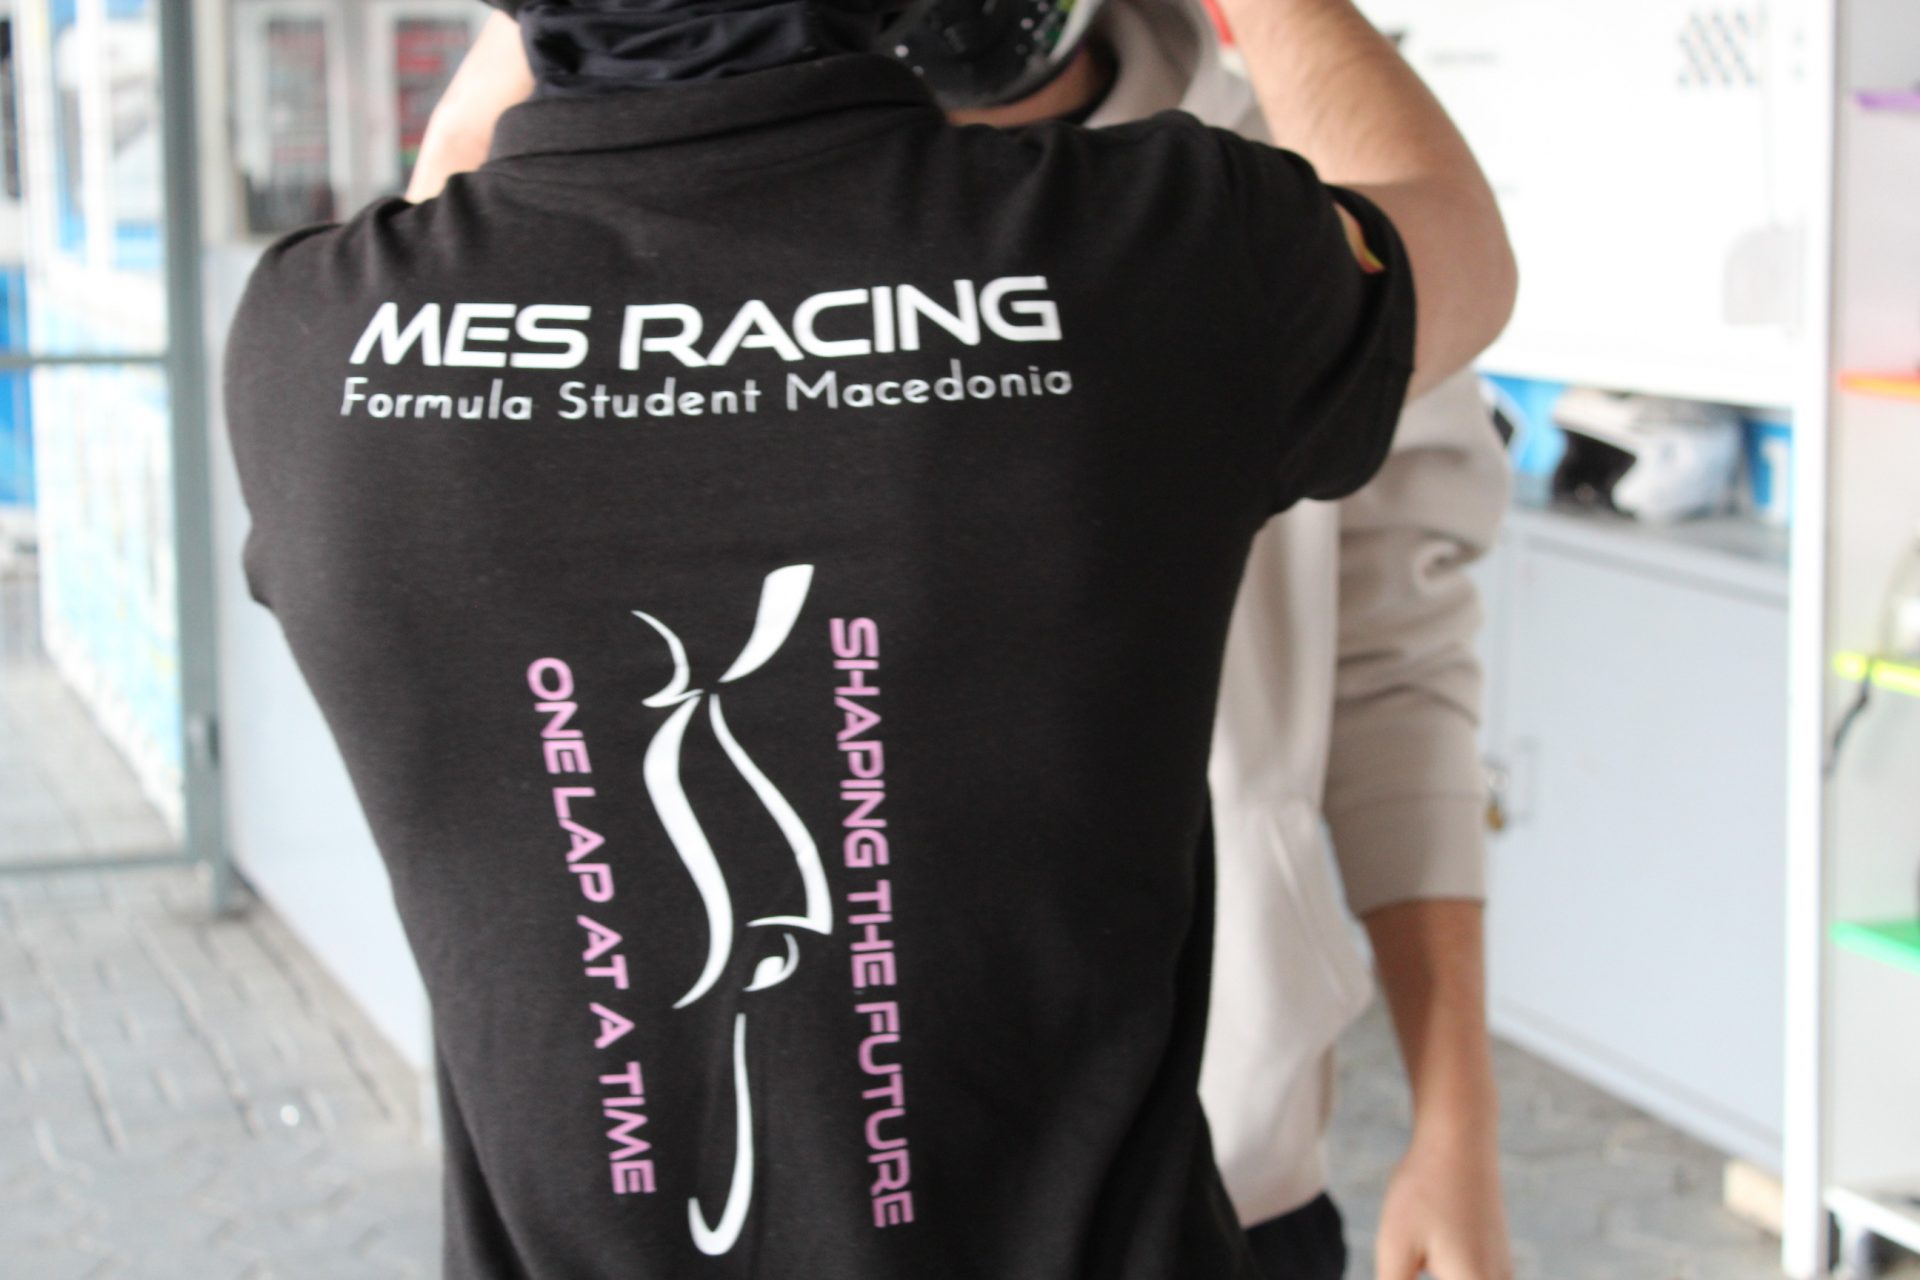 MES Racing T-shirt from the back